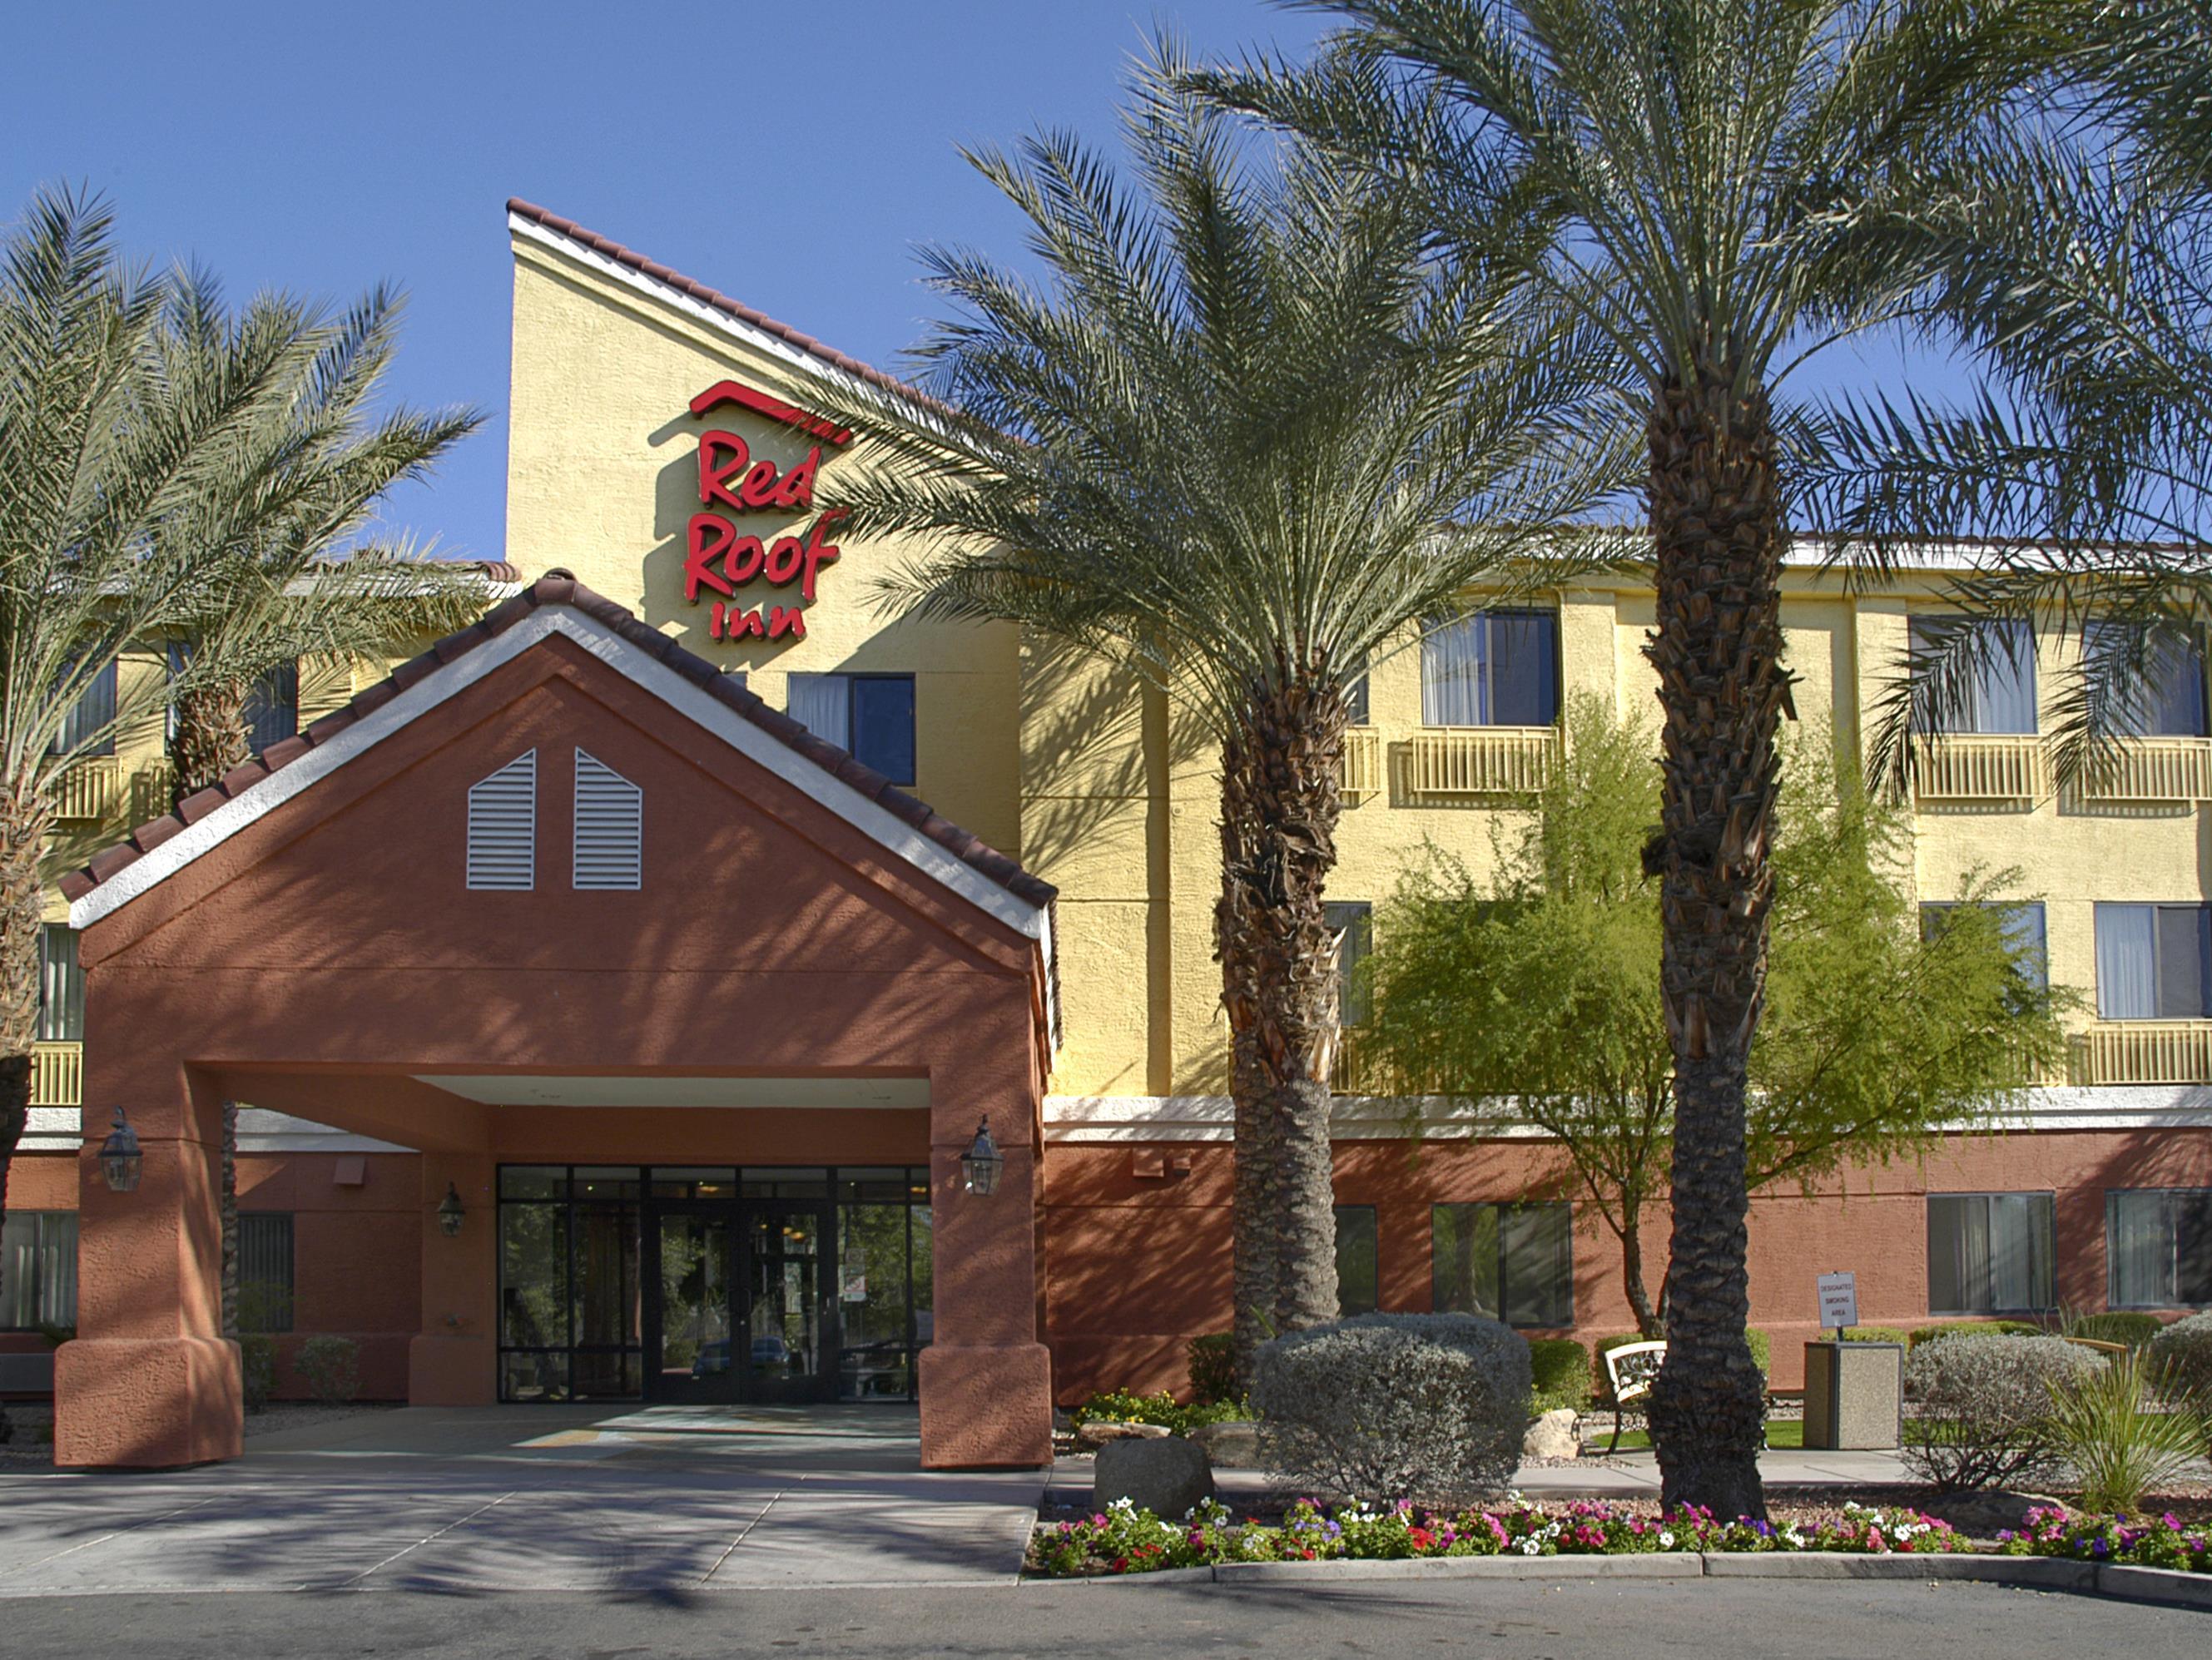 Red Roof Inn Tempe – Phoenix Airport Phoenix Town
 FAQ 2017, What facilities are there in Red Roof Inn Tempe – Phoenix Airport Phoenix Town
 2017, What Languages Spoken are Supported in Red Roof Inn Tempe – Phoenix Airport Phoenix Town
 2017, Which payment cards are accepted in Red Roof Inn Tempe – Phoenix Airport Phoenix Town
 , Phoenix Town
 Red Roof Inn Tempe – Phoenix Airport room facilities and services Q&A 2017, Phoenix Town
 Red Roof Inn Tempe – Phoenix Airport online booking services 2017, Phoenix Town
 Red Roof Inn Tempe – Phoenix Airport address 2017, Phoenix Town
 Red Roof Inn Tempe – Phoenix Airport telephone number 2017,Phoenix Town
 Red Roof Inn Tempe – Phoenix Airport map 2017, Phoenix Town
 Red Roof Inn Tempe – Phoenix Airport traffic guide 2017, how to go Phoenix Town
 Red Roof Inn Tempe – Phoenix Airport, Phoenix Town
 Red Roof Inn Tempe – Phoenix Airport booking online 2017, Phoenix Town
 Red Roof Inn Tempe – Phoenix Airport room types 2017.